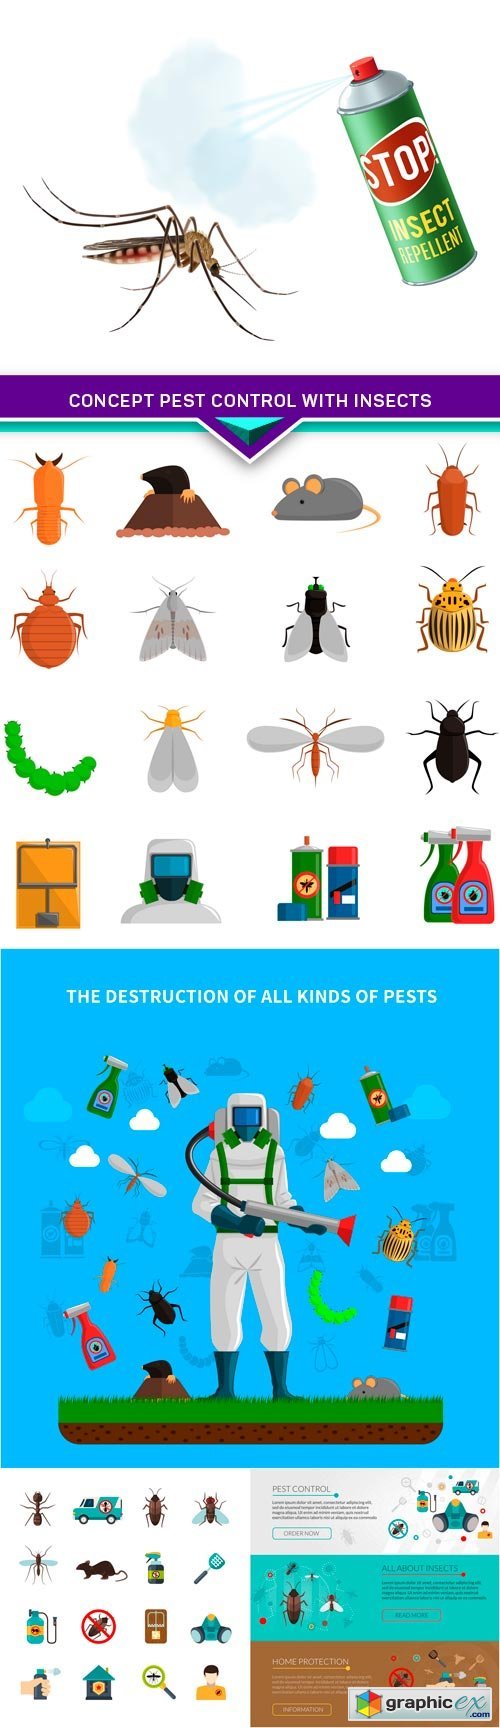 Concept pest control with insects 5X EPS